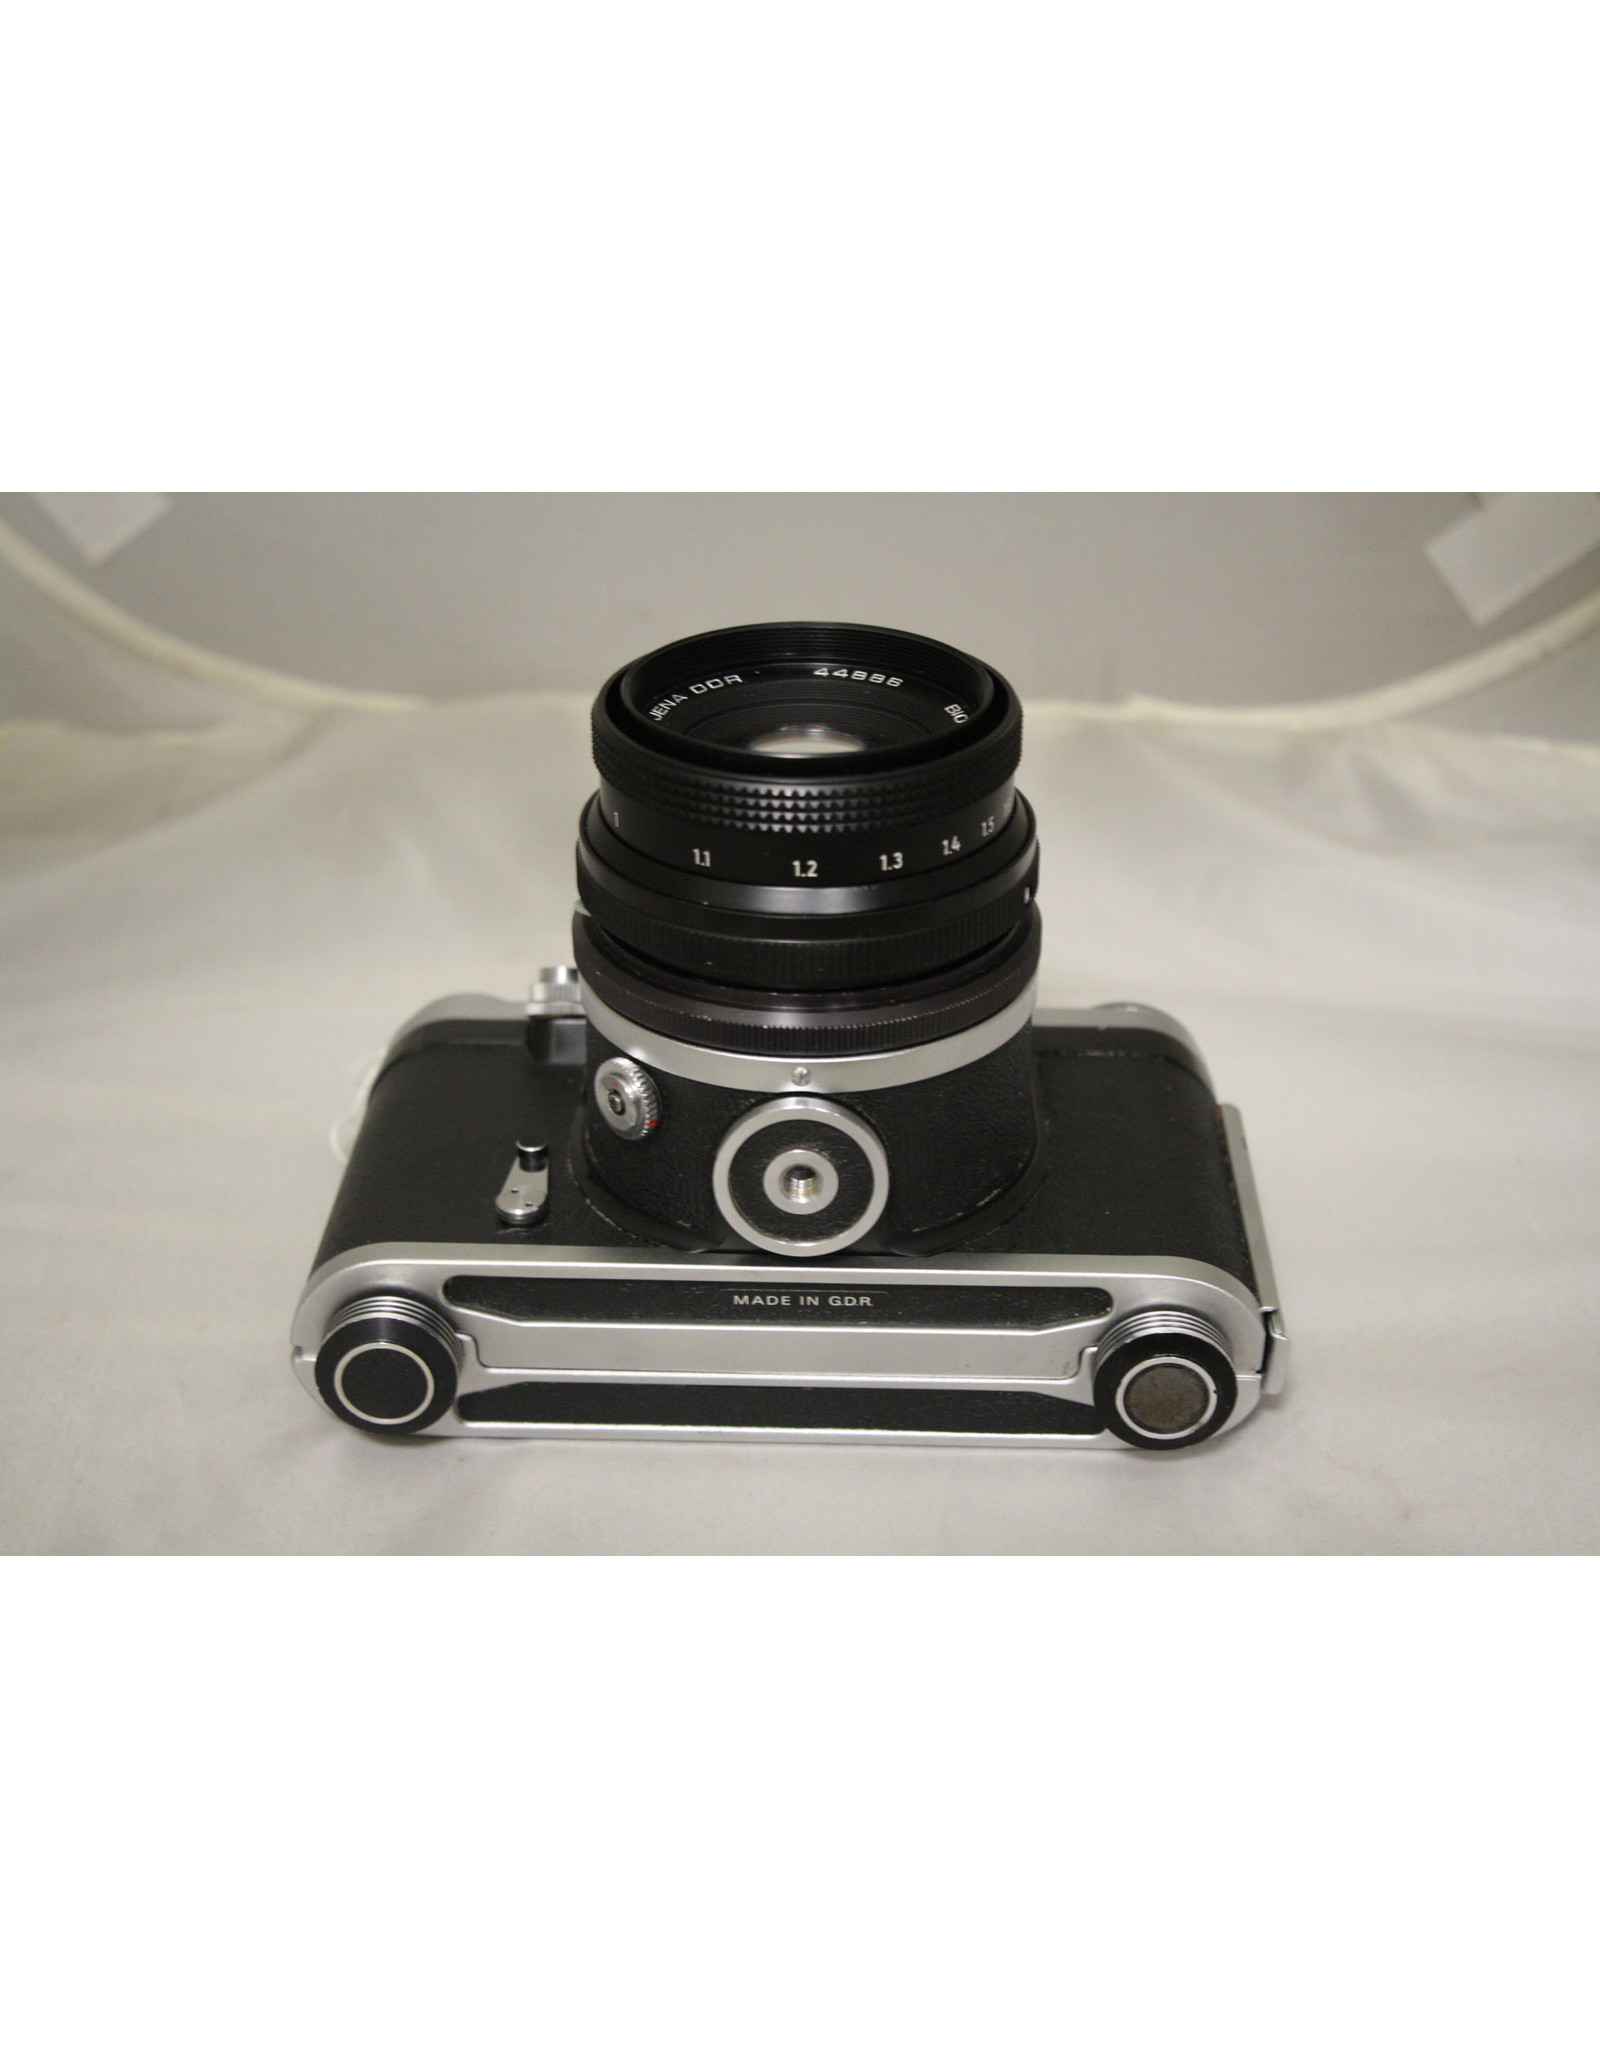 Pentacon Pentacon Six TL 6x6 Camera Biometar 80mm f2.8 Lens with WL Finder (Excellent-Pre-owned)